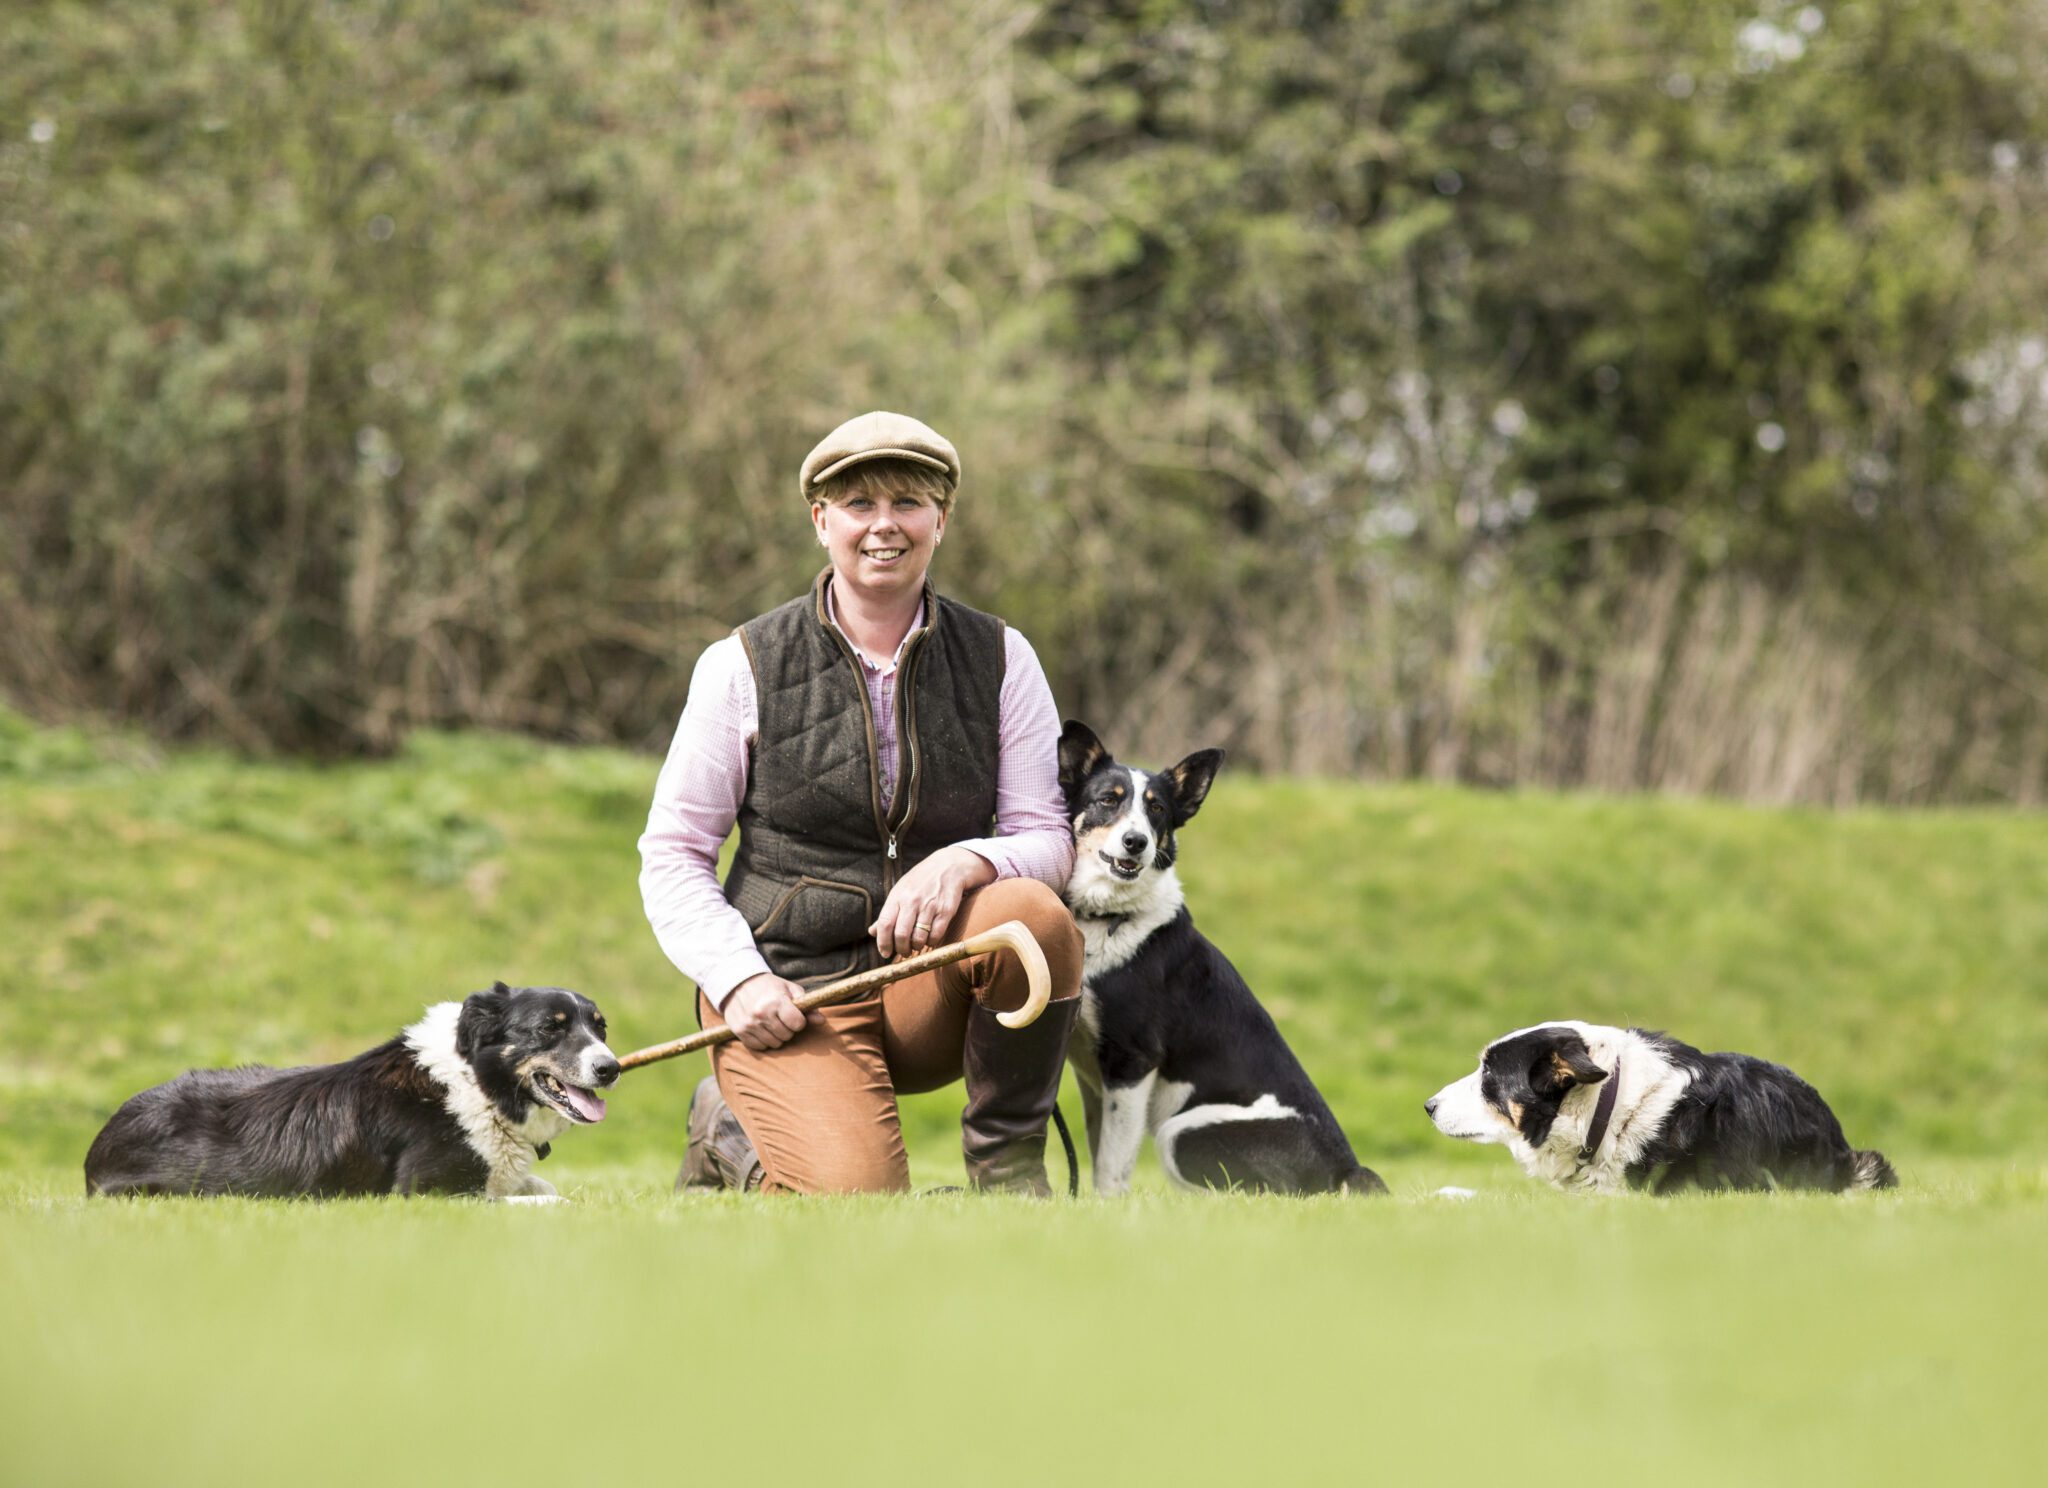 Duck Herding Event | Sheep dog and Farmer